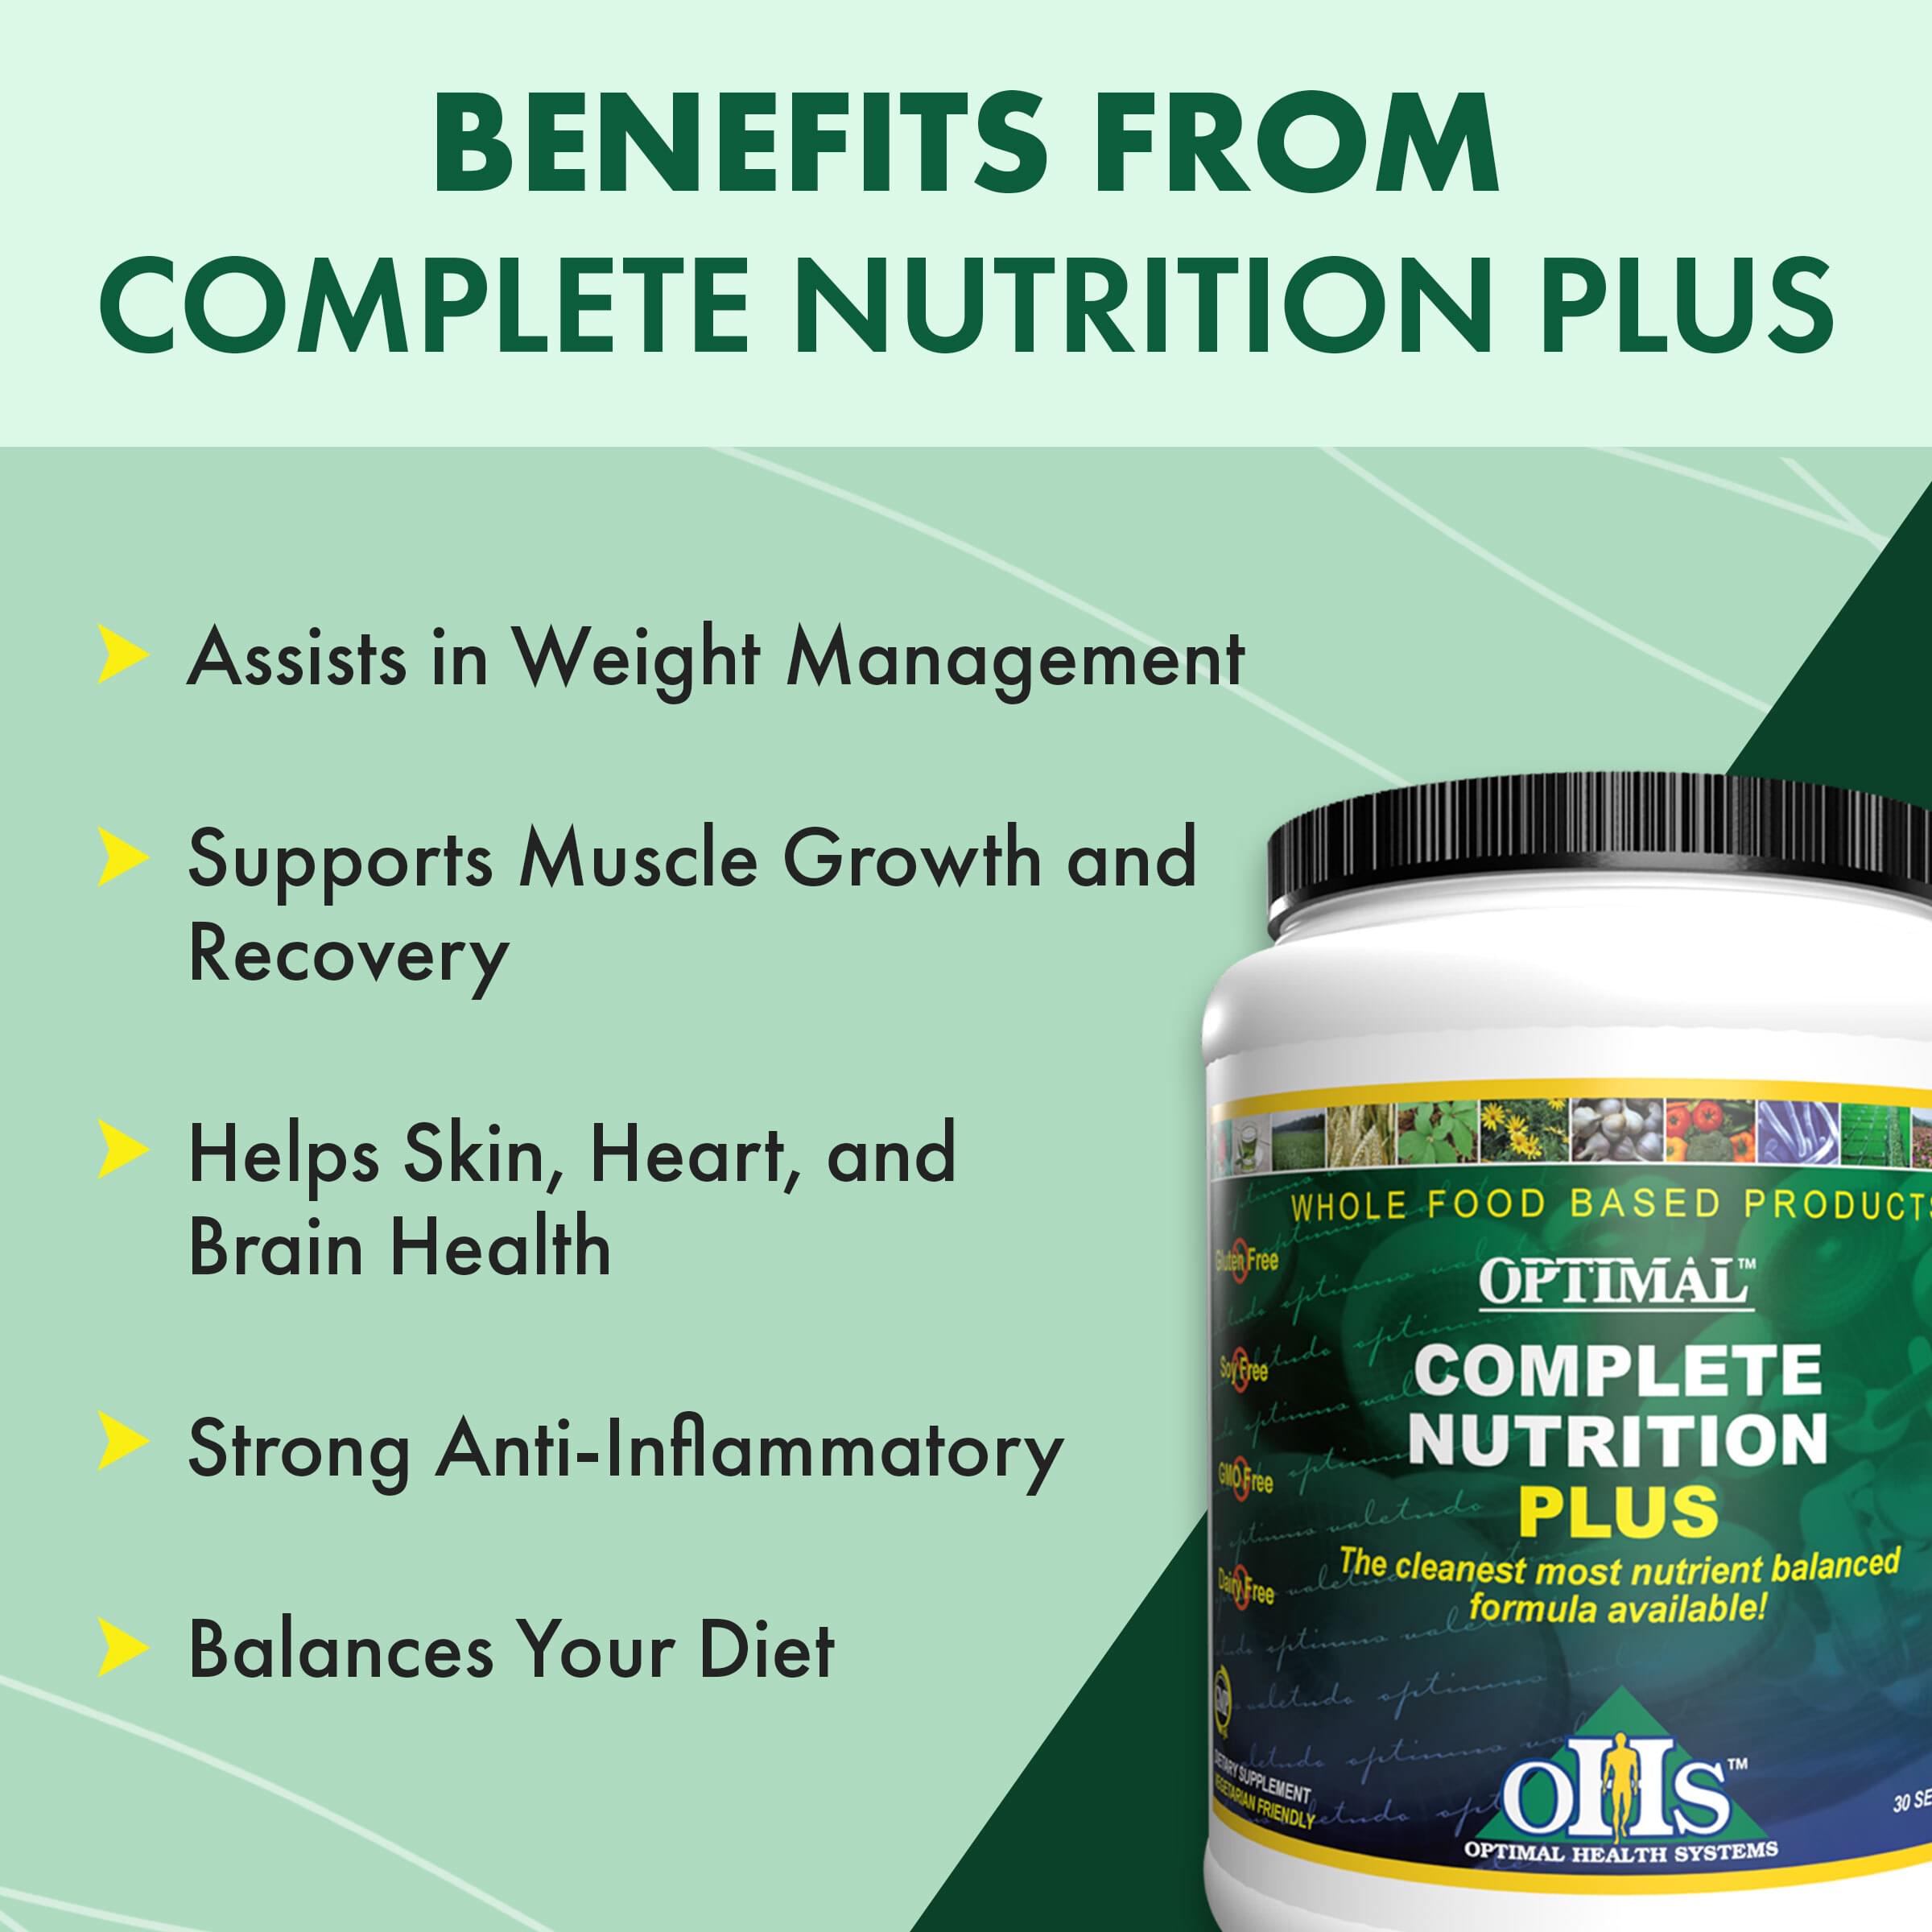 Benefits from Complete Nutrition Plus